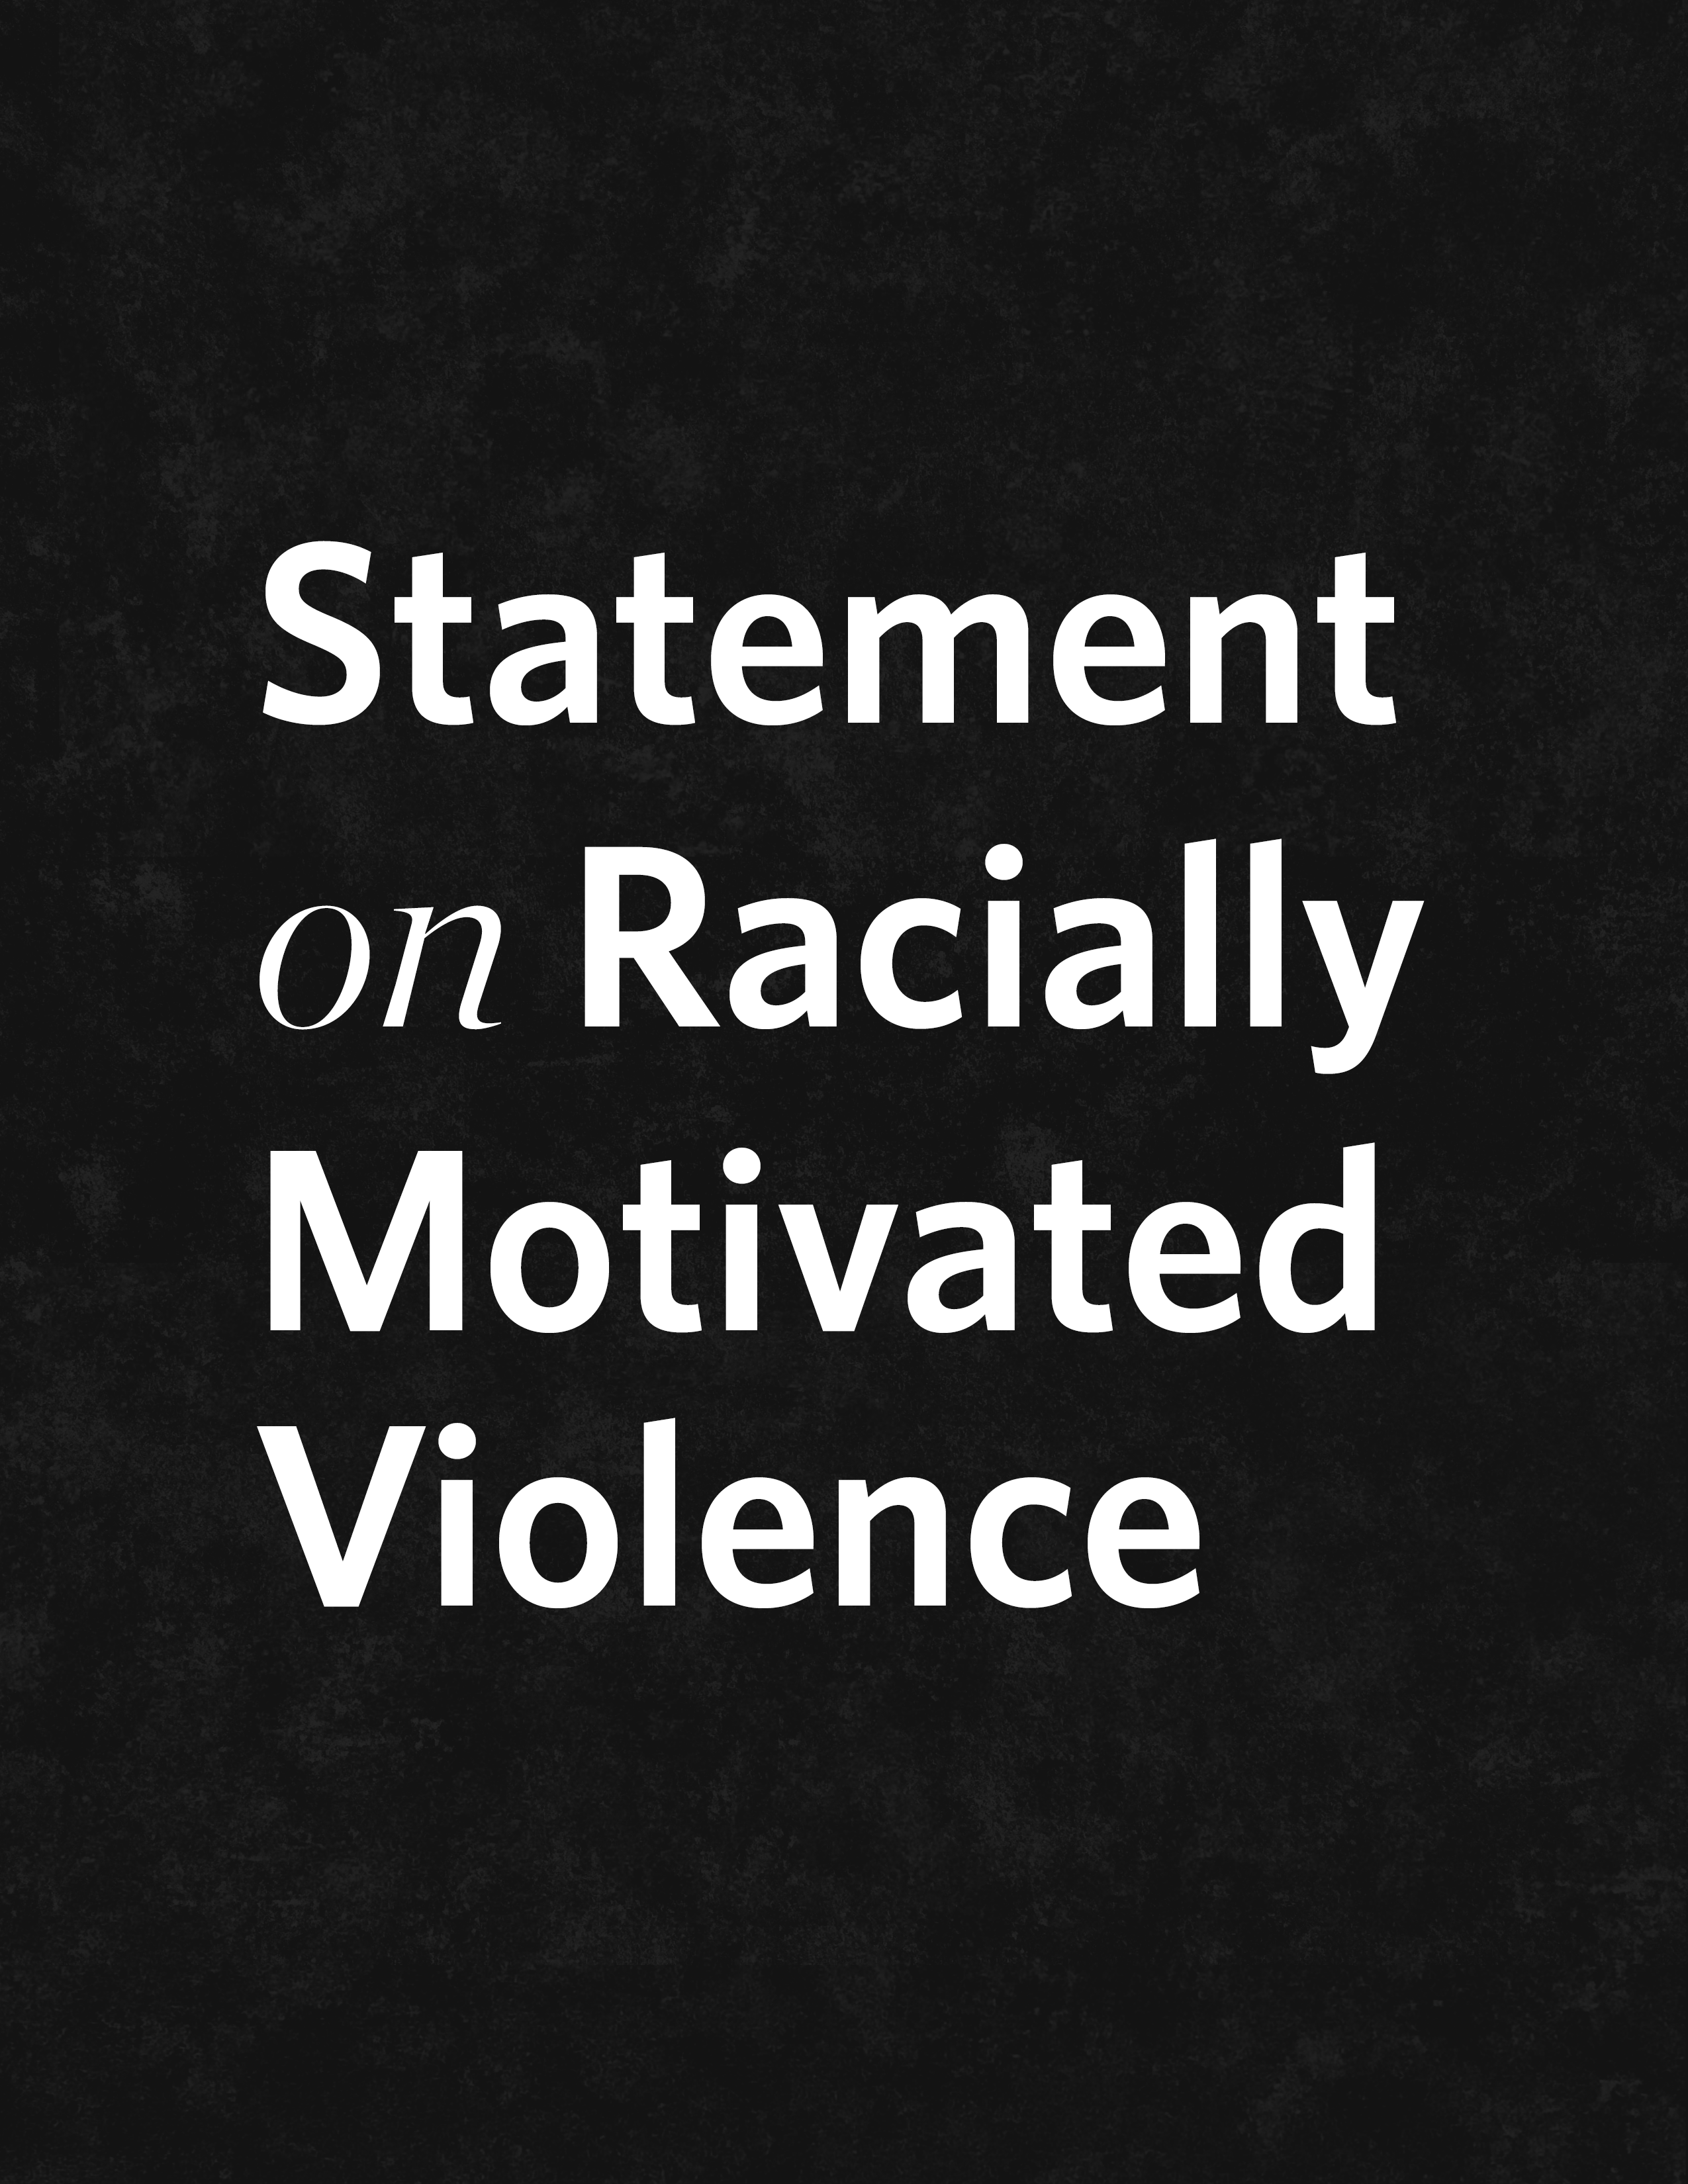 Statement on Racially Motivated Violence